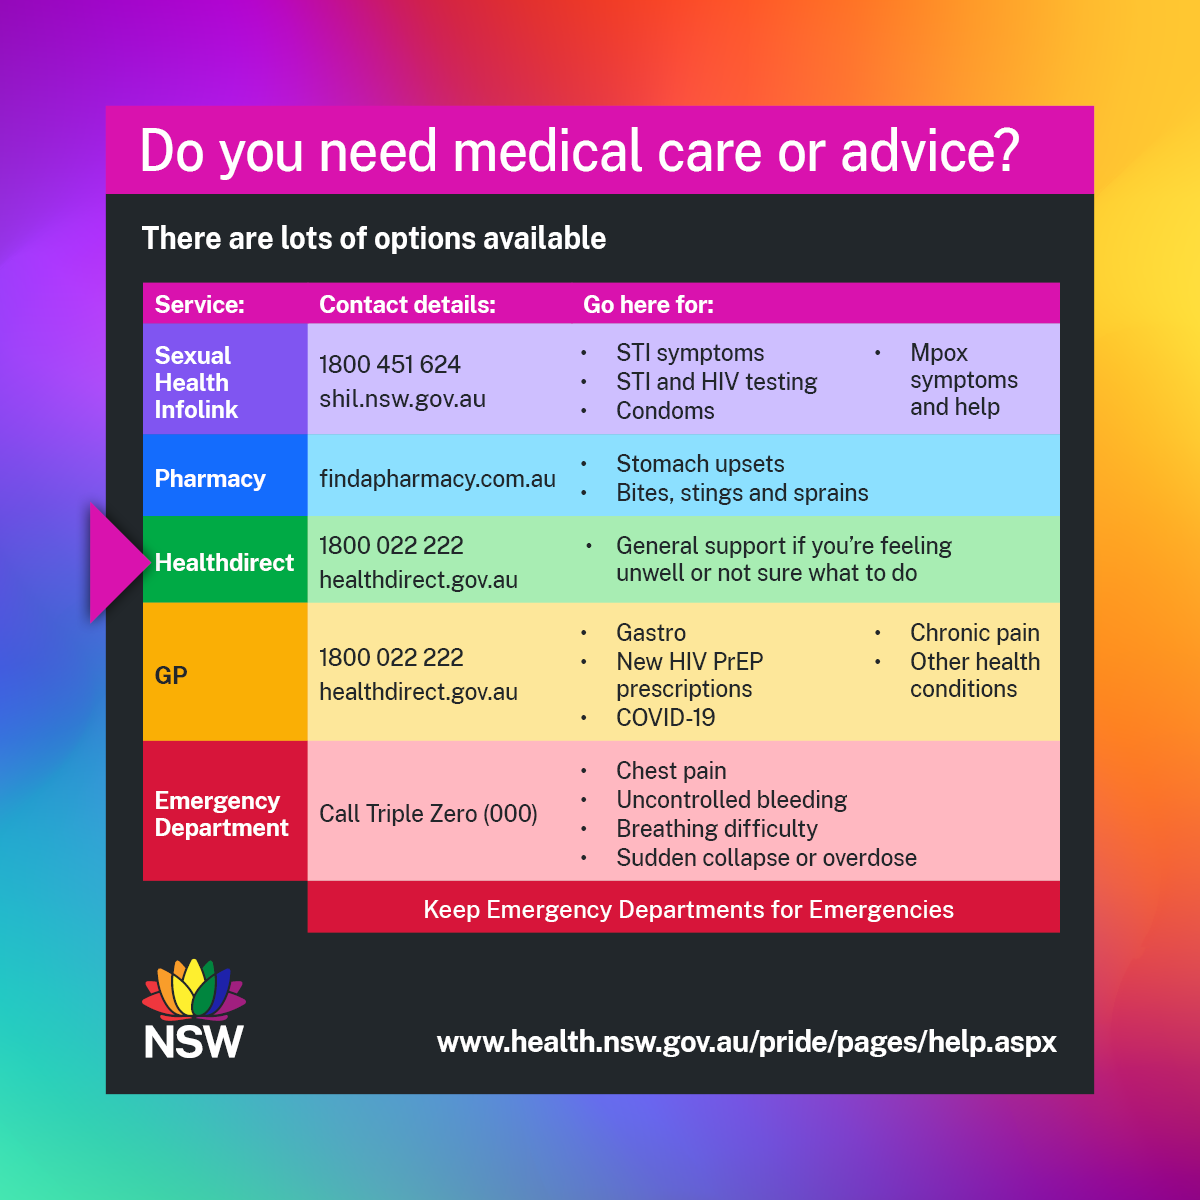 Social tile with a list of medical services and conditions to contact them for